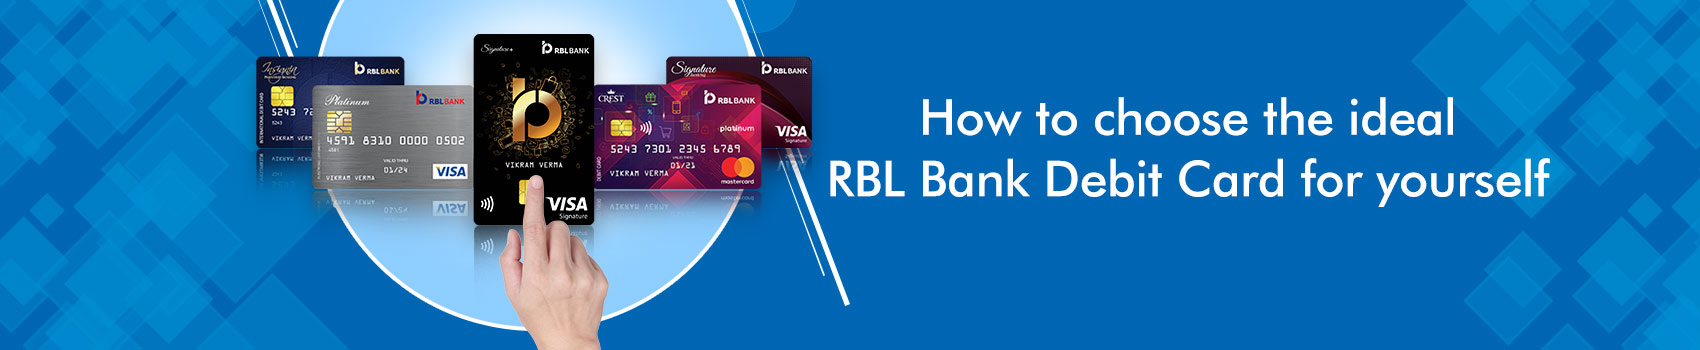 How to choose the ideal RBL Bank Debit Card for yourself